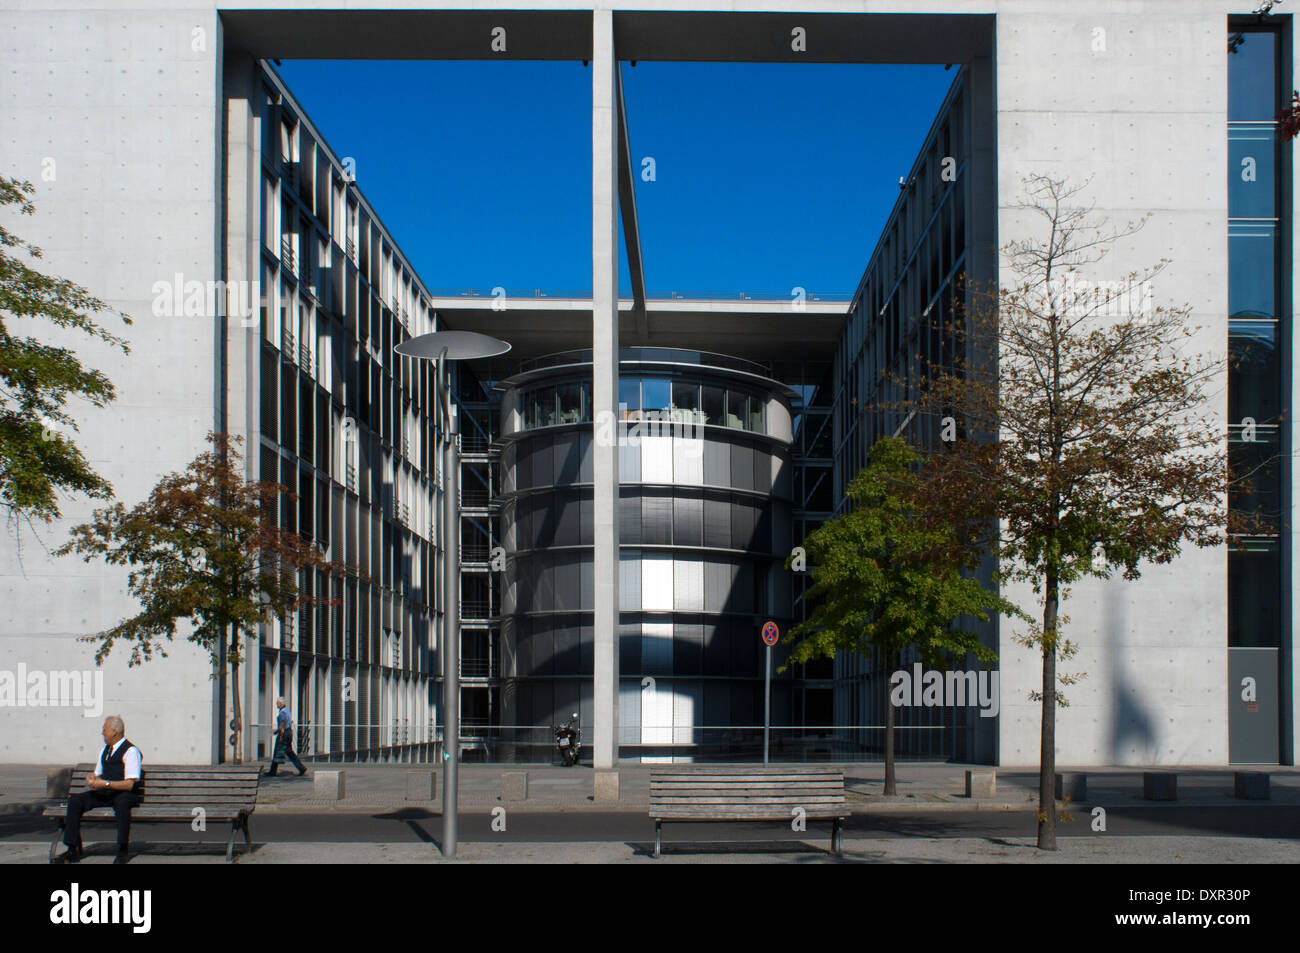 Paul Loebe House, Germany, Berlin. The glass-and-concrete Paul-Löbe-Haus houses offices for the Bundestag’s parliamentary commit Stock Photo